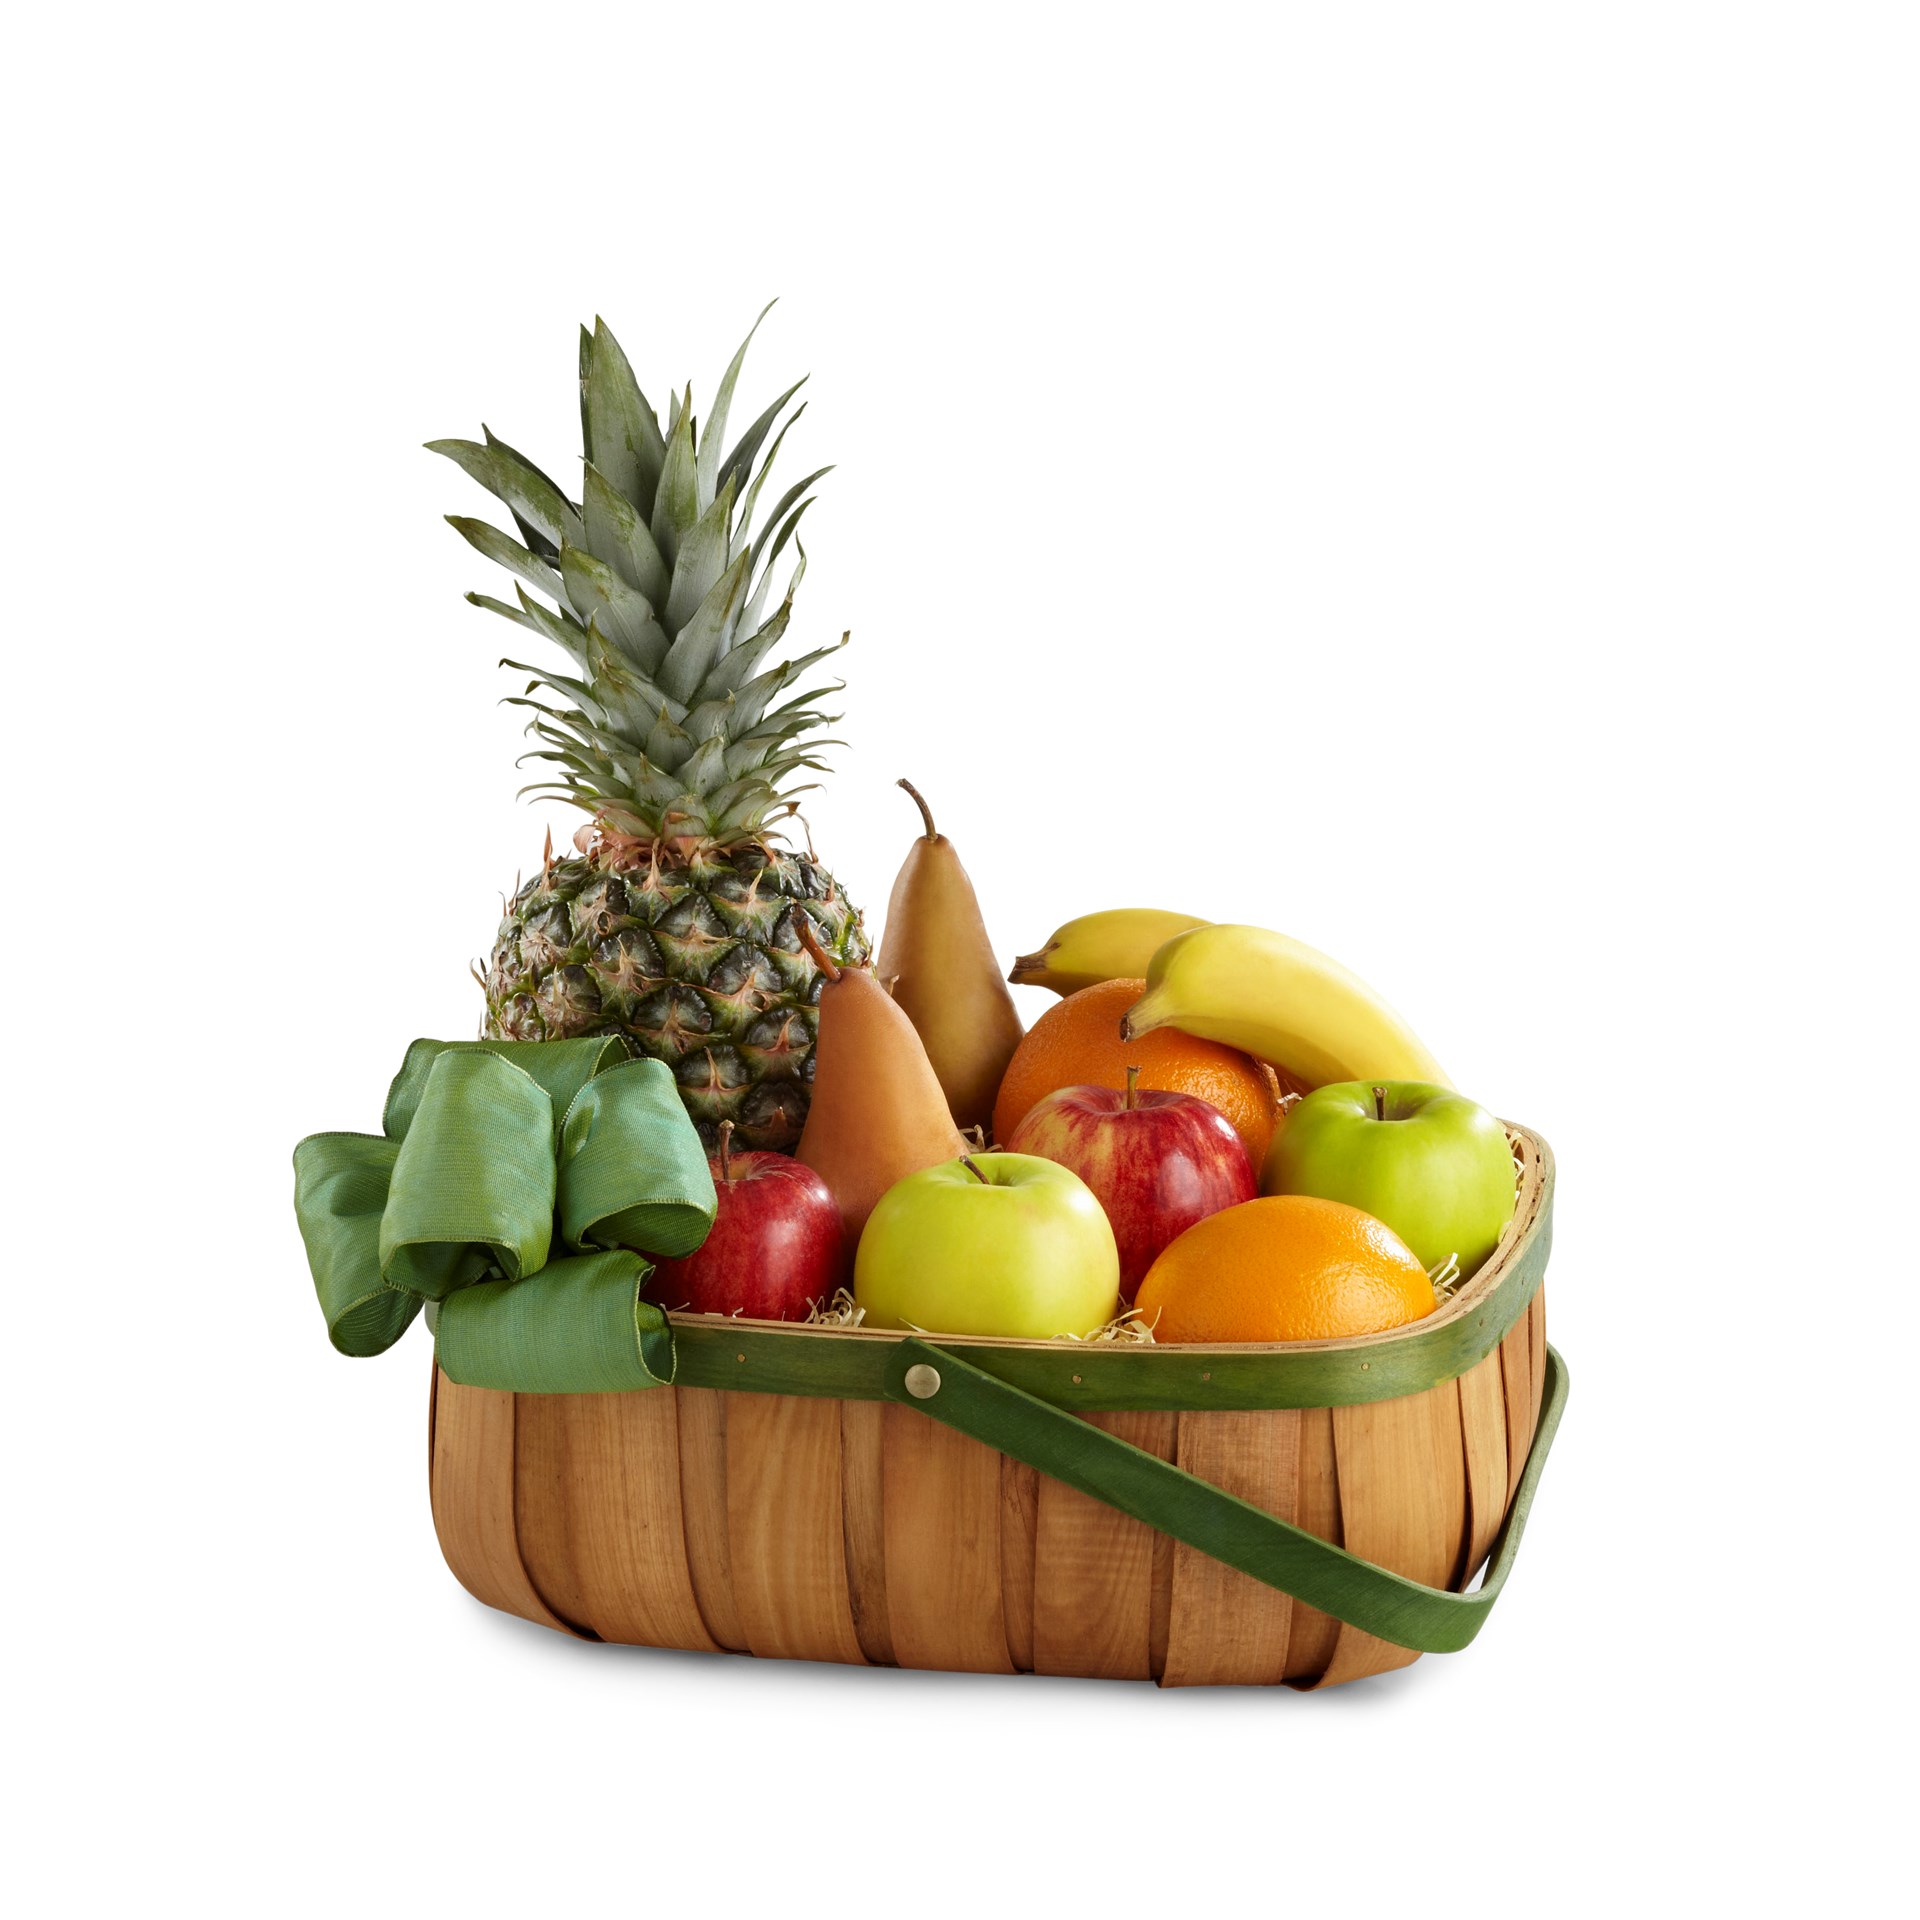 product image for The FTD Thoughtful Gesture Fruit Basket